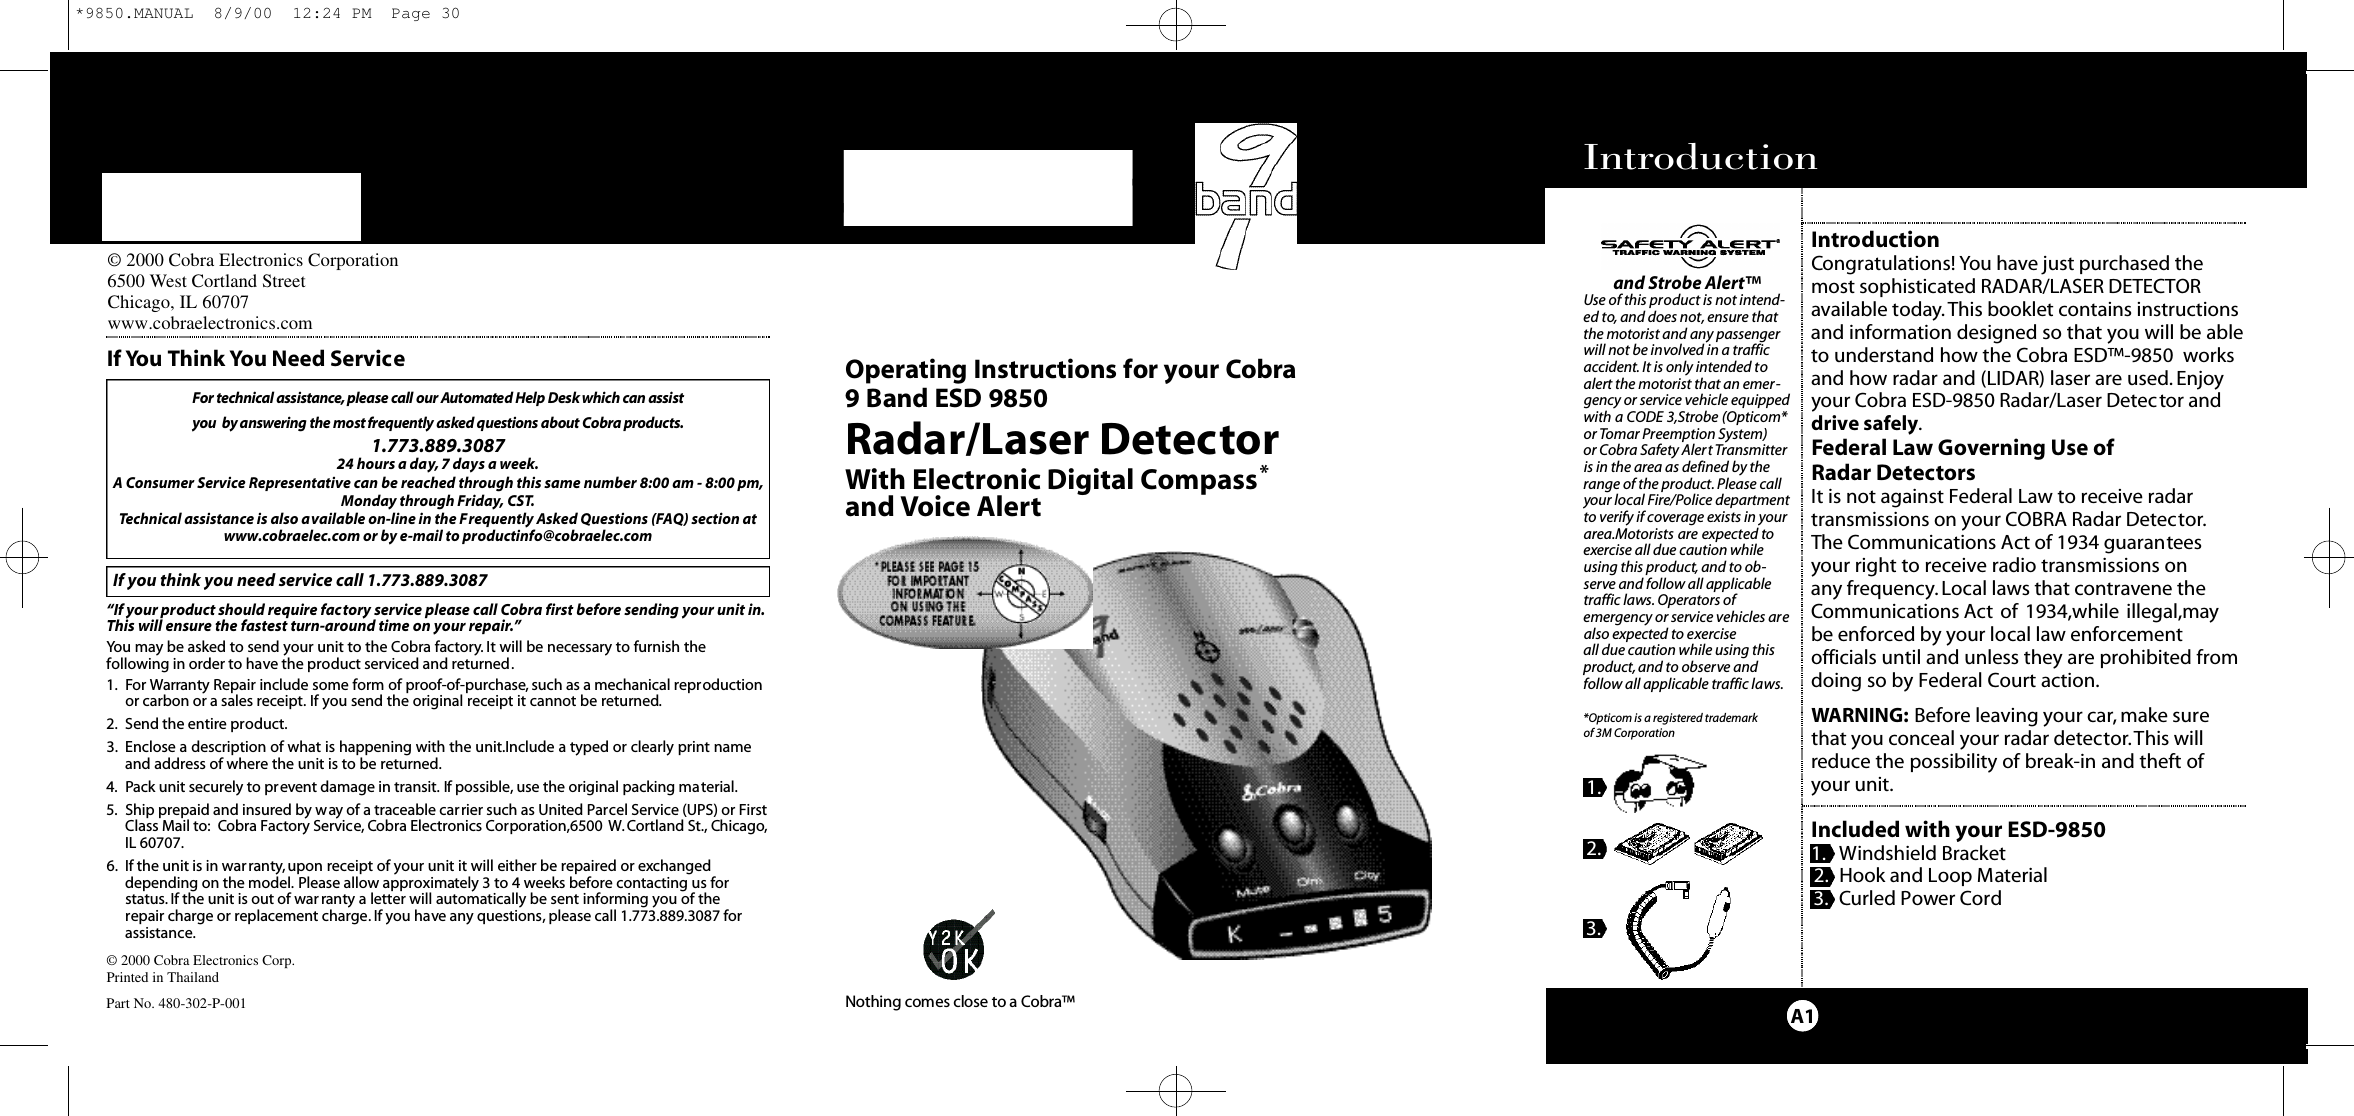 IntroductionA1IntroductionCongratulations! You have just purchased themost sophisticated RADAR/LASER DETECTORavailable today.This booklet contains instructionsand information designed so that you will be ableto understand how the Cobra ESD™-9850  worksand how radar and (LIDAR) laser are used. Enjoyyour Cobra ESD-9850 Radar/Laser Detector anddrive safely.Federal Law Governing Use of Radar DetectorsIt is not against Federal Law to receive radar transmissions on your COBRA Radar Detector.The Communications Act of 1934 guarantees your right to receive radio transmissions on any frequency.Local laws that contravene theCommunications Act of 1934,while illegal,maybe enforced by your local law enforcementofficials until and unless they are prohibited fromdoing so by Federal Court action.WARNING: Before leaving your car, make surethat you conceal your radar detector.This willreduce the possibility of break-in and theft ofyour unit.Included with your ESD-98501. Windshield Bracket2. Hook and Loop Material3. Curled Power CordM i c ro Ta l kRadar/Laser DetectorWith Electronic Digital Compass*and Voice AlertO pe rating Instru ctions for your Co b ra 9 Band ESD 9850© 2000 Cobra Electronics Corp.Printed in ThailandPart No. 480-302-P-001For te c h n i cal assistance,please call our Au to m a ted Help Desk which can assist you  by answering the most fre q u e n t l y asked questions about Co b ra prod u ct s .1.773.889.3087 24 hours a day,7 days a week.A Consumer Service Representative can be reached through this same number 8:00 am - 8:00 pm,Monday through Friday, CST.Technical assistance is also available on-line in the Frequently Asked Questions (FAQ) section atwww.cobraelec.com or by e-mail to productinfo@cobraelec.comIf you think you need service call 1.773.889.3087“If your product should require factory service please call Cobra first before sending your unit in.This will ensure the fastest turn-around time on your repair.”You may be asked to send your unit to the Cobra factory. It will be necessary to furnish thefollowing in order to have the product serviced and returned.1. For Warranty Repair include some form of proof-of-purchase, such as a mechanical reproductionor carbon or a sales receipt. If you send the original receipt it cannot be returned.2. Send the entire product.3. Enclose a description of what is happening with the unit.Include a typed or clearly print nameand address of where the unit is to be returned.4. Pack unit securely to prevent damage in transit. If possible, use the original packing material.5. Ship prepaid and insured by way of a traceable carrier such as United Parcel Service (UPS) or FirstClass Mail to: Cobra Factory Service, Cobra Electronics Corporation,6500 W.Cortland St., Chicago,IL 60707.6. If the unit is in war ranty,upon receipt of your unit it will either be repaired or exchangeddepending on the model. Please allow approximately 3 to 4 weeks before contacting us for status. If the unit is out of war ranty a letter will automatically be sent informing you of the repair charge or replacement charge. If you have any questions, please call 1.773.889.3087 forassistance.If You Think You Need Serviceand Strobe Alert™Use of this product is not intend-ed to, and does not, ensure thatthe motorist and any passengerwill not be involved in a trafficaccident. It is only intended toalert the motorist that an emer-gency or service vehicle equippedwith a CODE 3,Strobe (Opticom*or Tomar Preemption System) or Cobra Safety Alert Transmitteris in the area as defined by therange of the product. Please callyour local Fire/Police departmentto verify if coverage exists in yourarea.Motorists are expected toexercise all due caution whileusing this product, and to ob-serve and follow all applicabletraffic laws. Operators ofemergency or service vehicles arealso expected to exercise all due caution while using thisproduct, and to observe and follow all applicable traffic laws.*Opticom is a registered trademark of 3M Corporation1.2.3.Nothing comes close to a Co b ra ™© 2000 Cobra Electronics Corporation6500 West Cortland StreetChicago, IL 60707www.cobraelectronics.com*9850.MANUAL  8/9/00  12:24 PM  Page 30